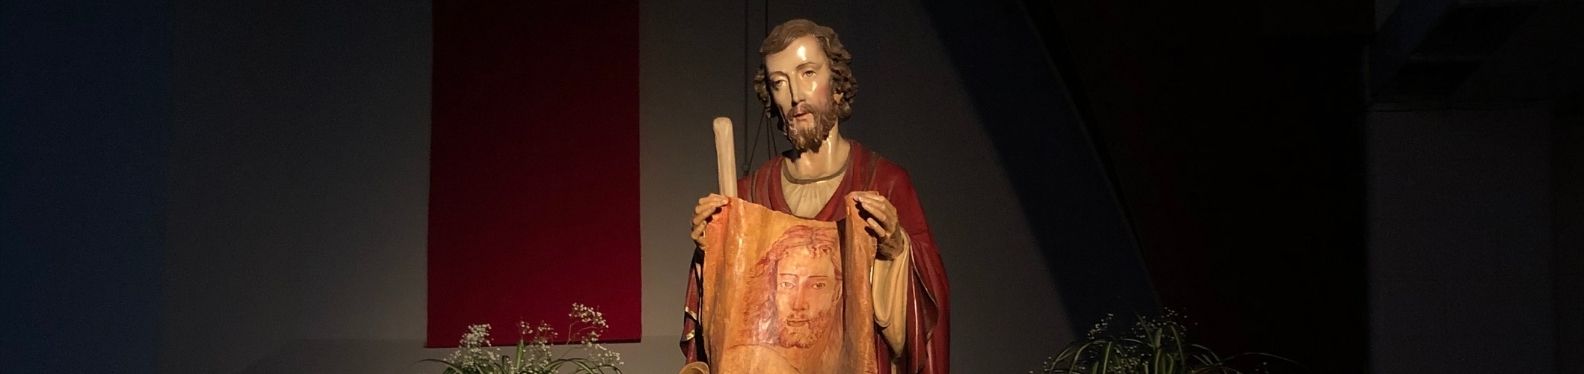 Photo of a St. Jude's statue zoomed on the face of St. Jude holding a cloth with Christ's face.